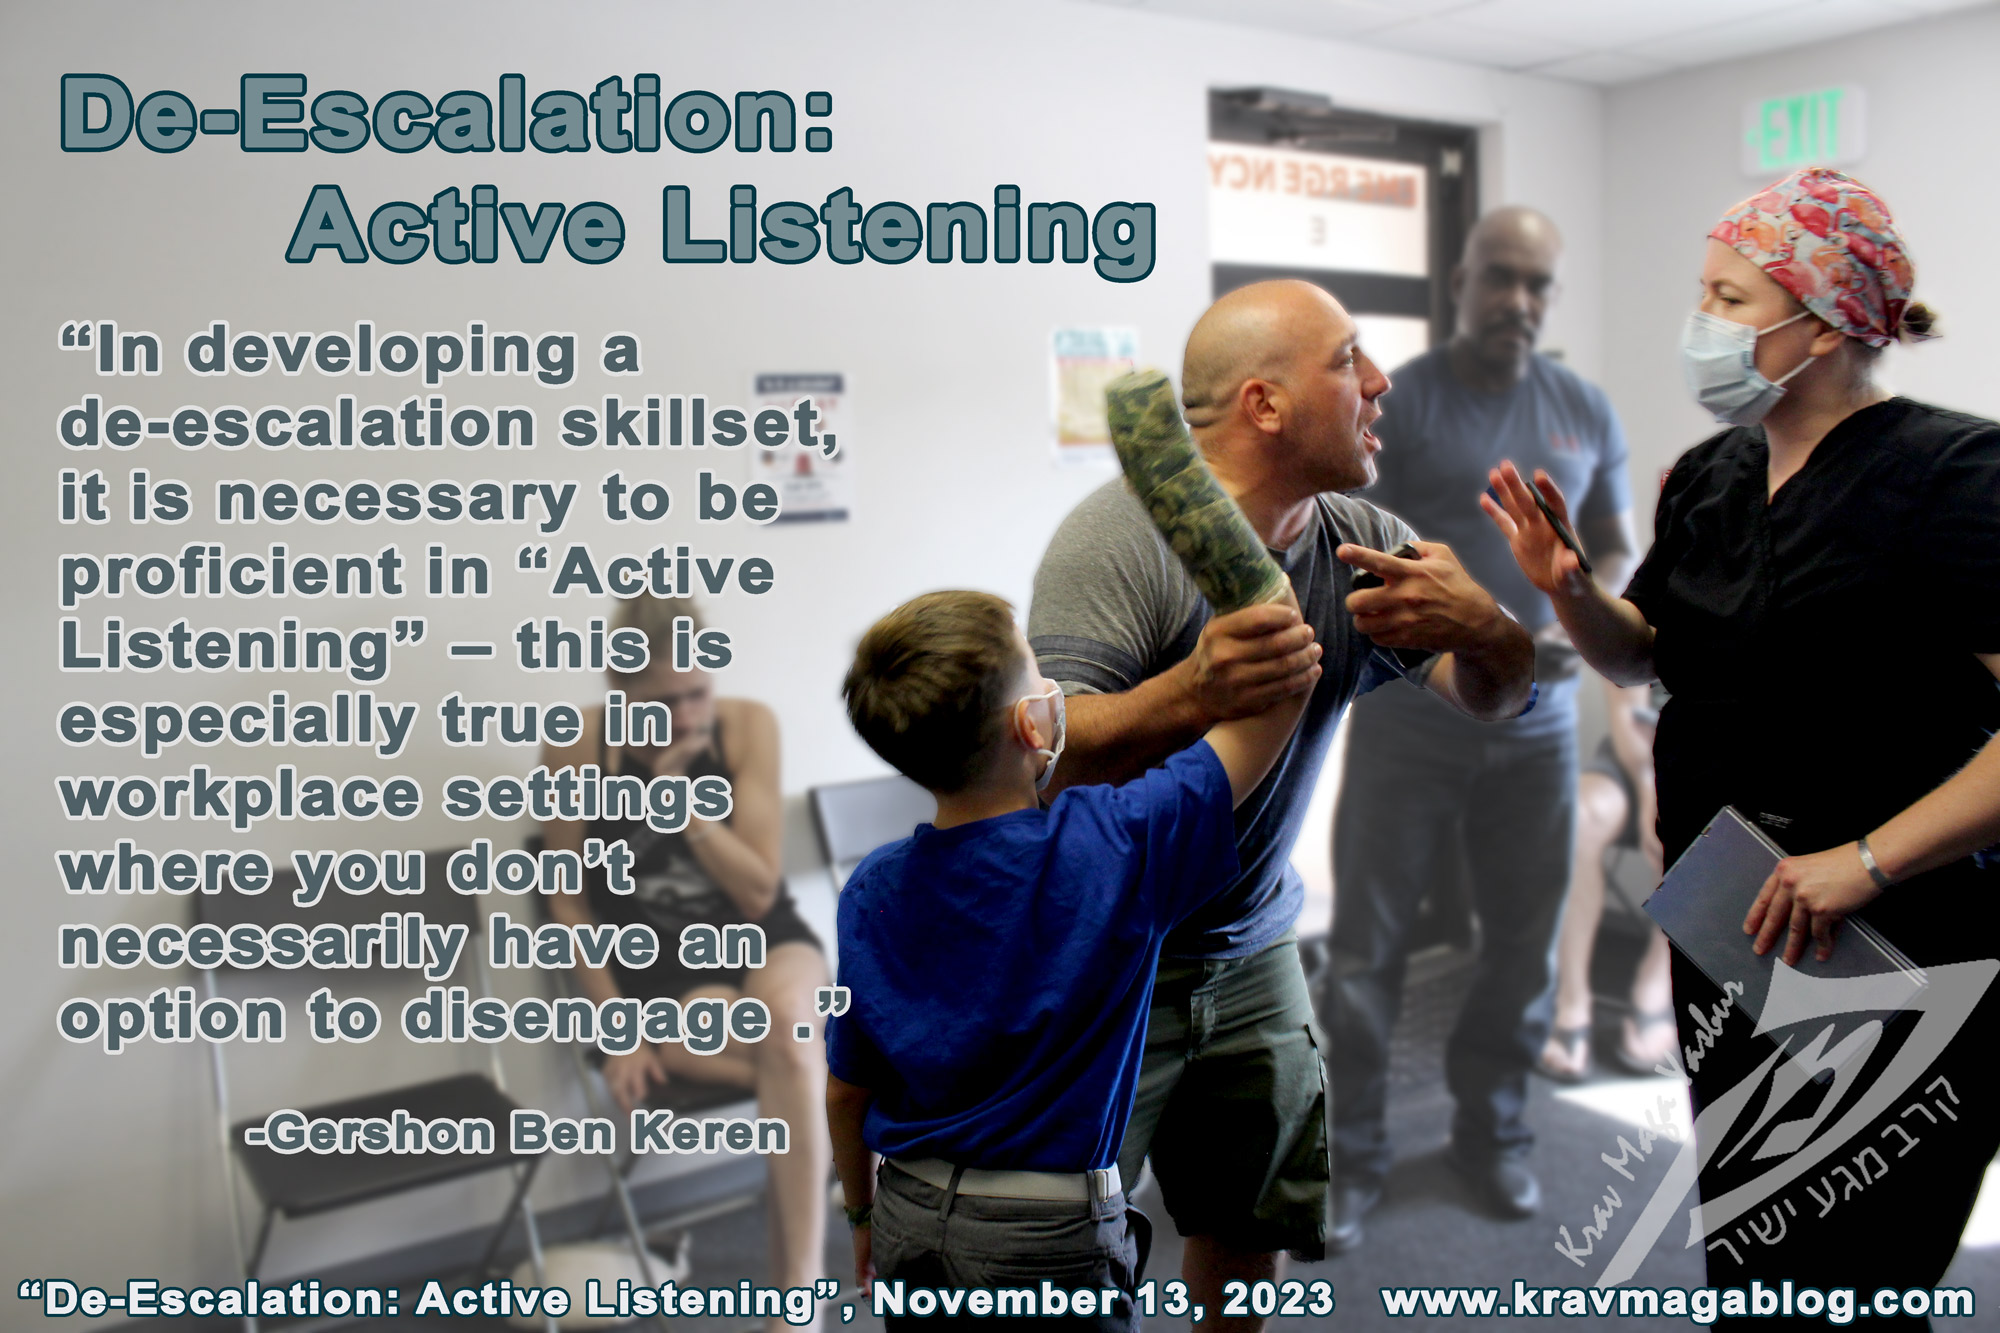 Blog About De-escalation and Active Listening